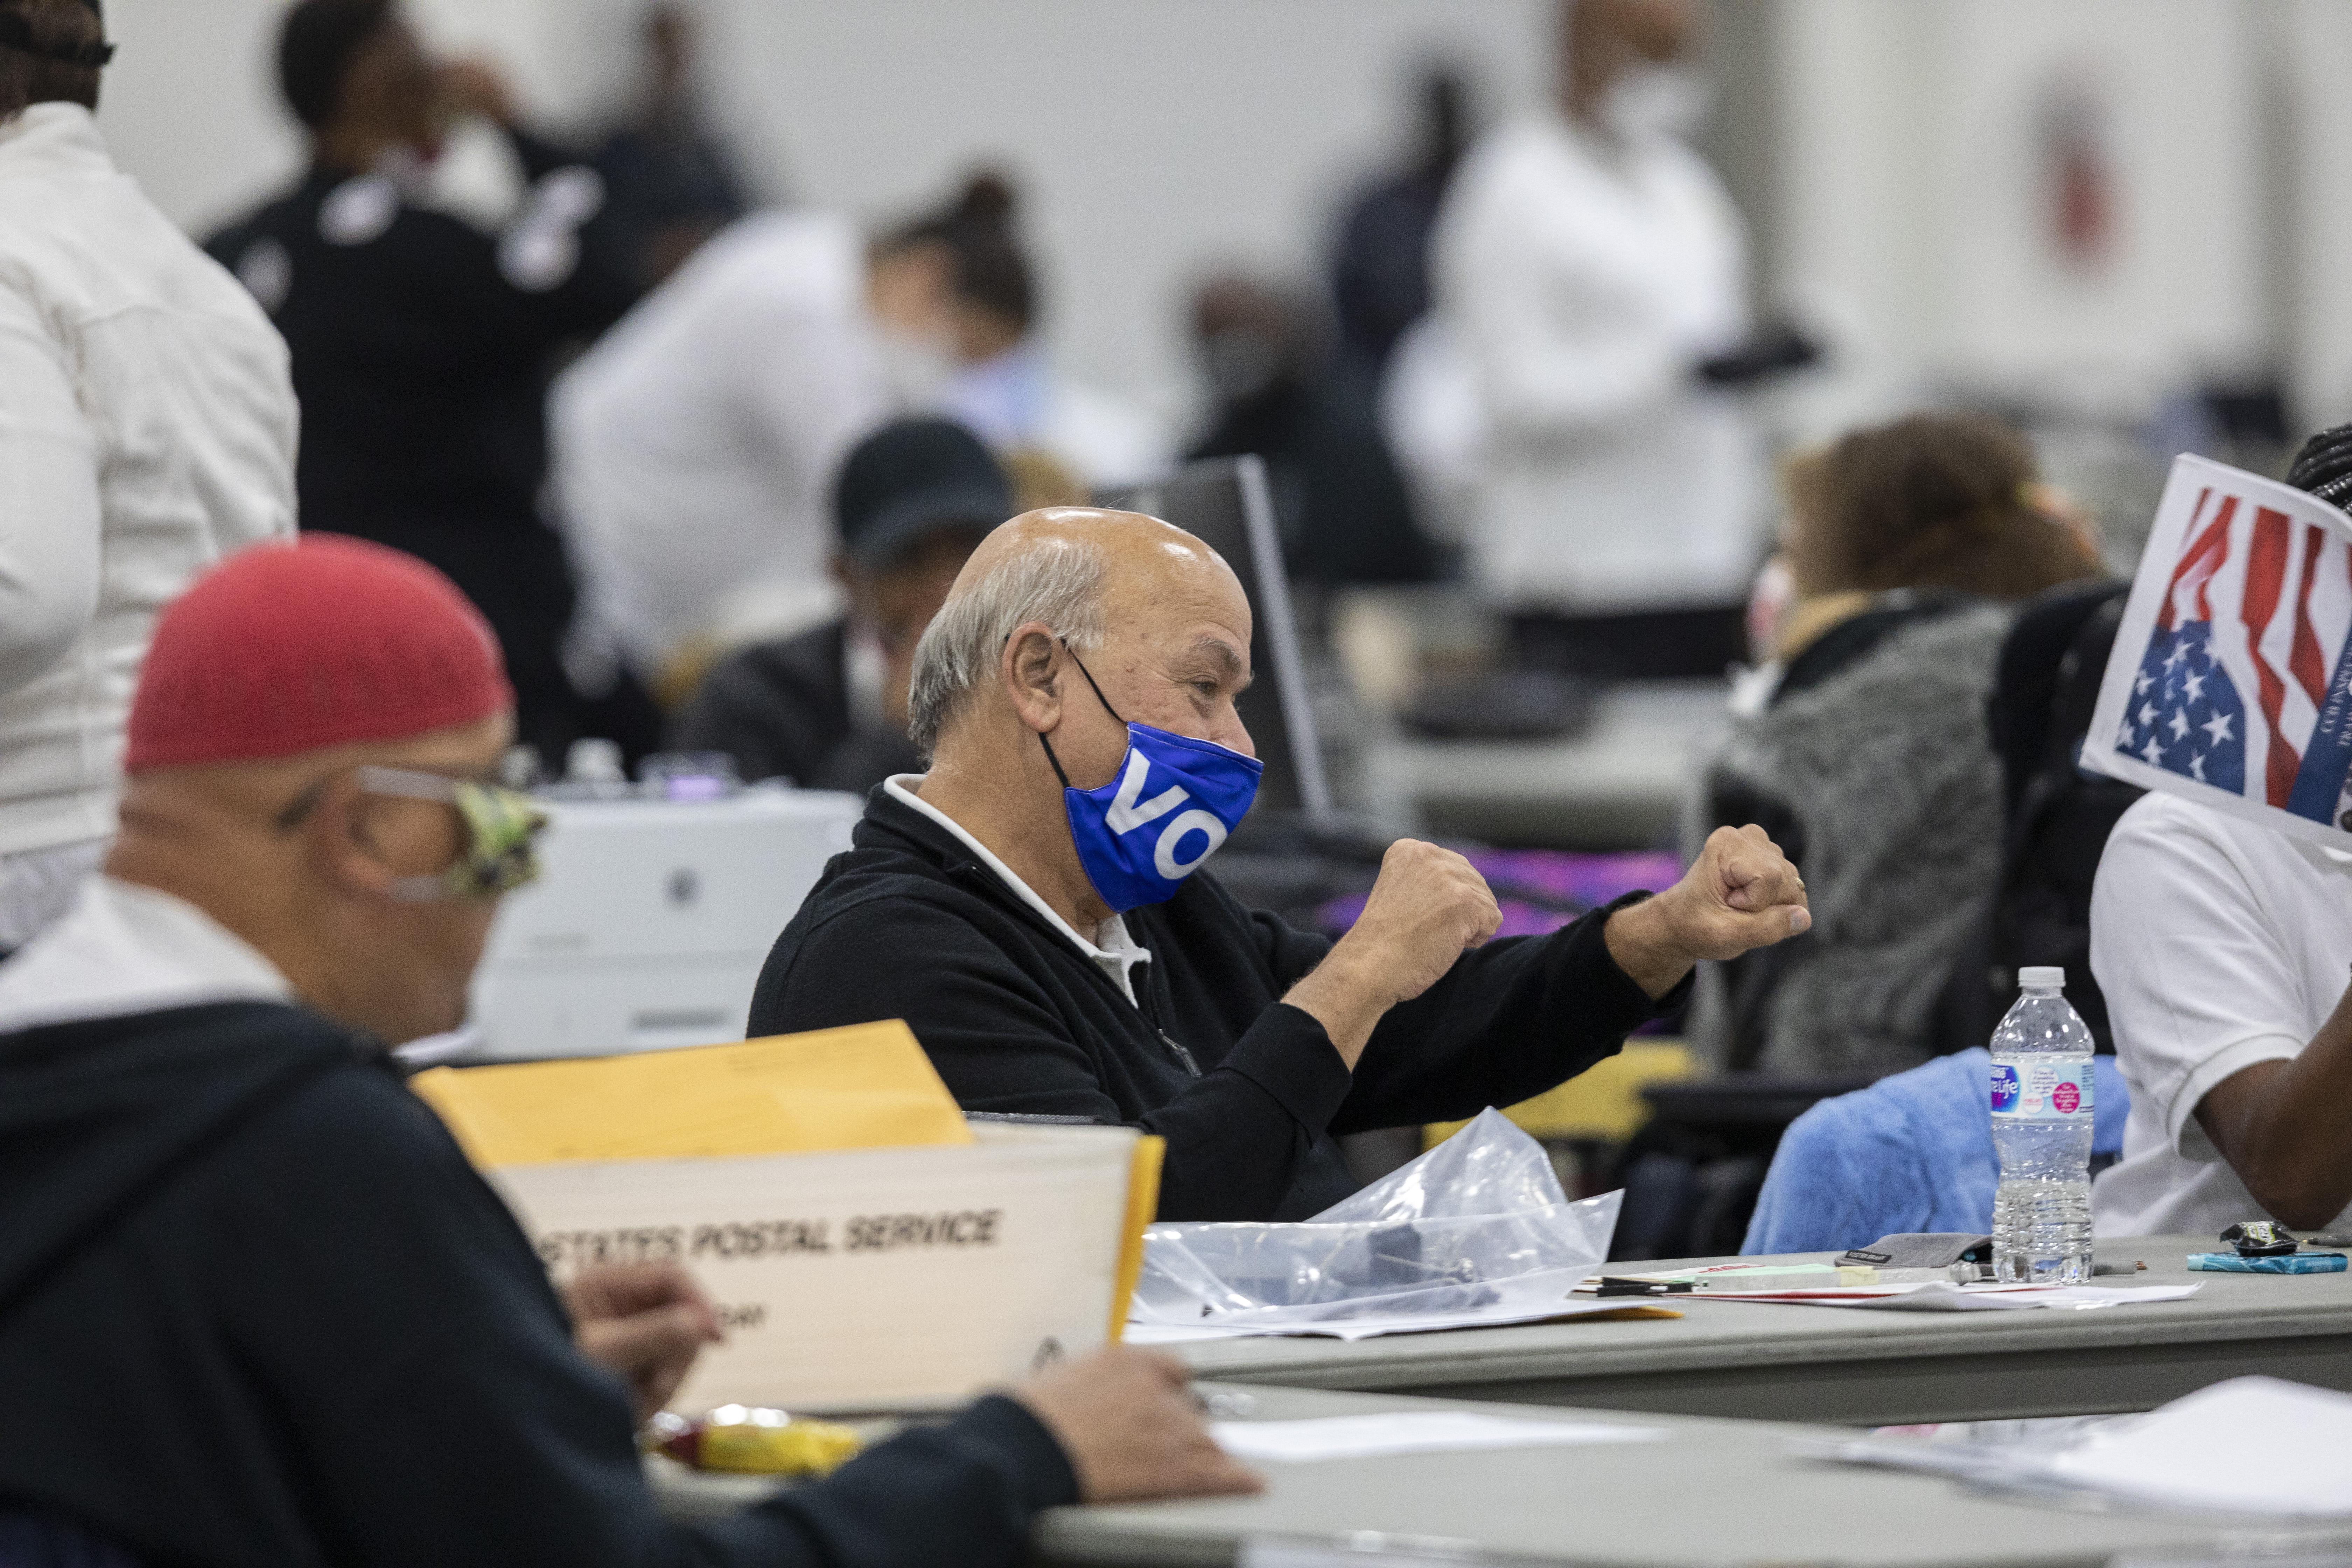 A man wearing a "VOTE" mask pumps his fists in a crowded room of people holding documents and ballots.